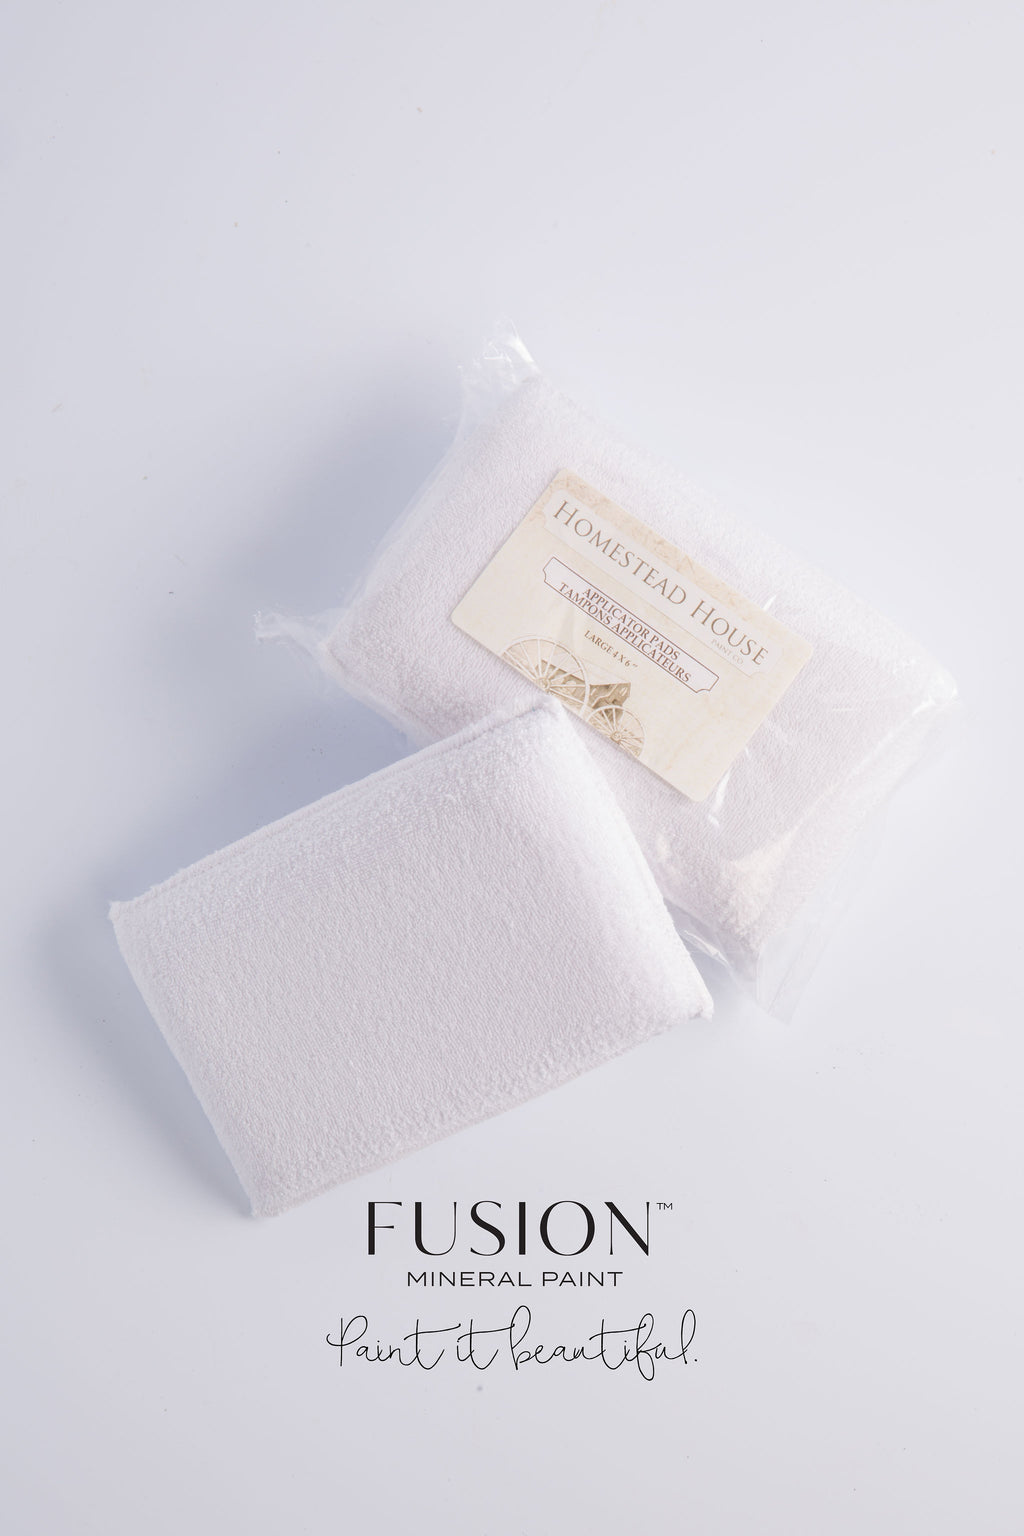 Applicator Pad (2-Pack) - Fusion Mineral Paint